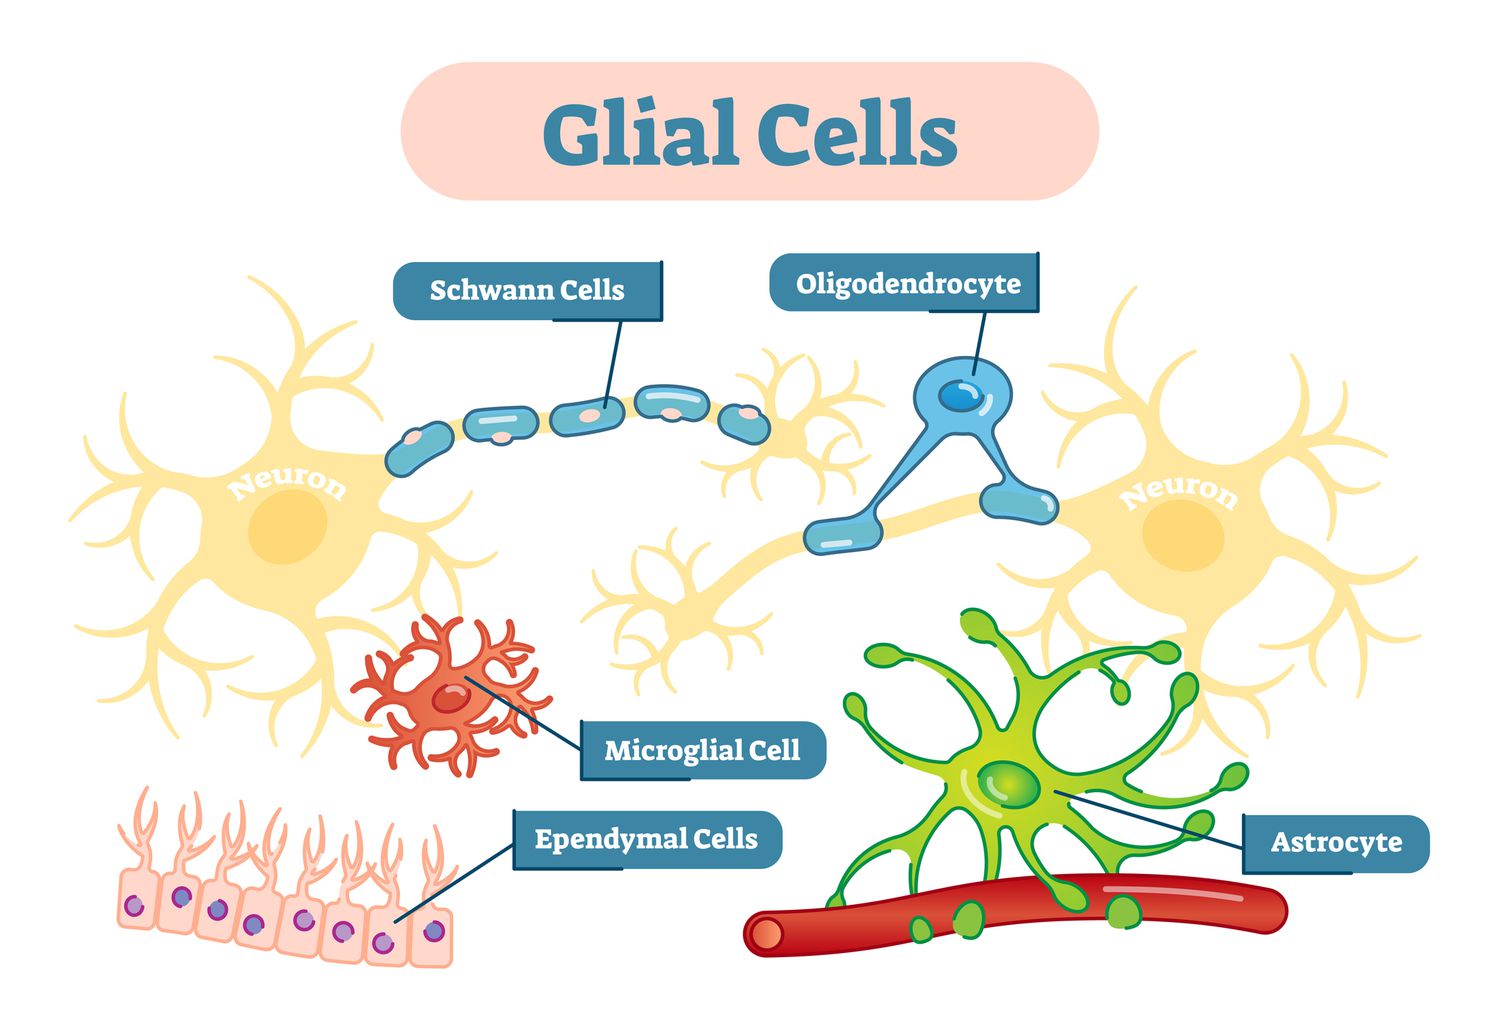 <p>cells that provide support for the neurons to grow on and around, deliver nutrients to neurons, produce myelin to coat axons, clean up waste products and dead neurons, influence information processing, and, during prenatal development, influence the generation of new neurons. </p>